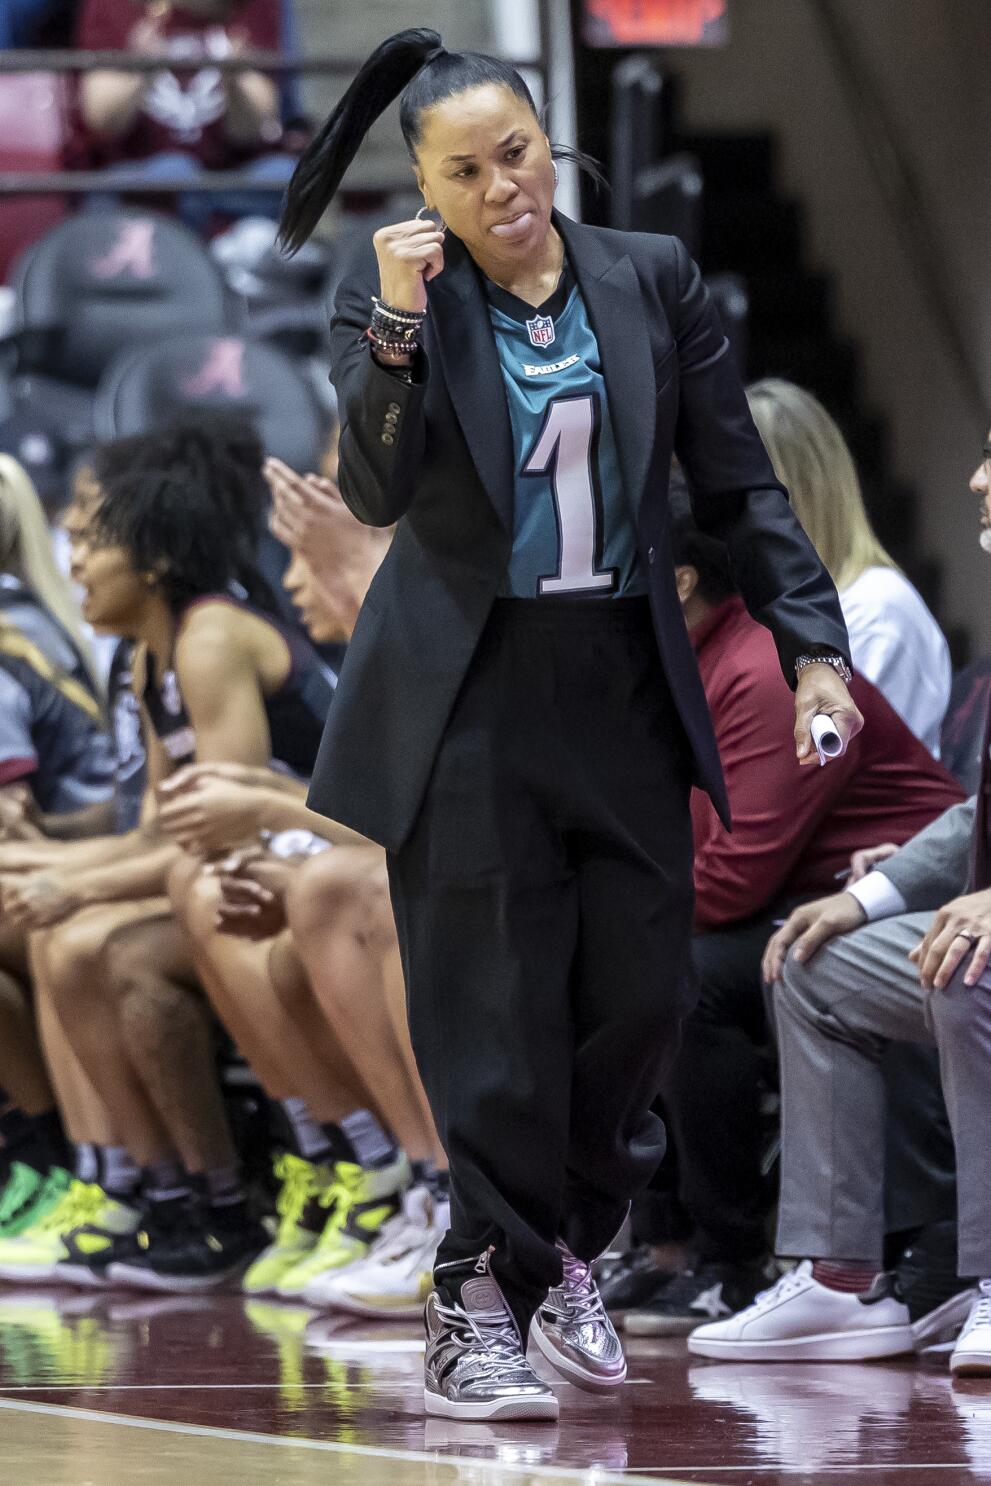 Dawn Staley to get statue across from State House - COLAtoday